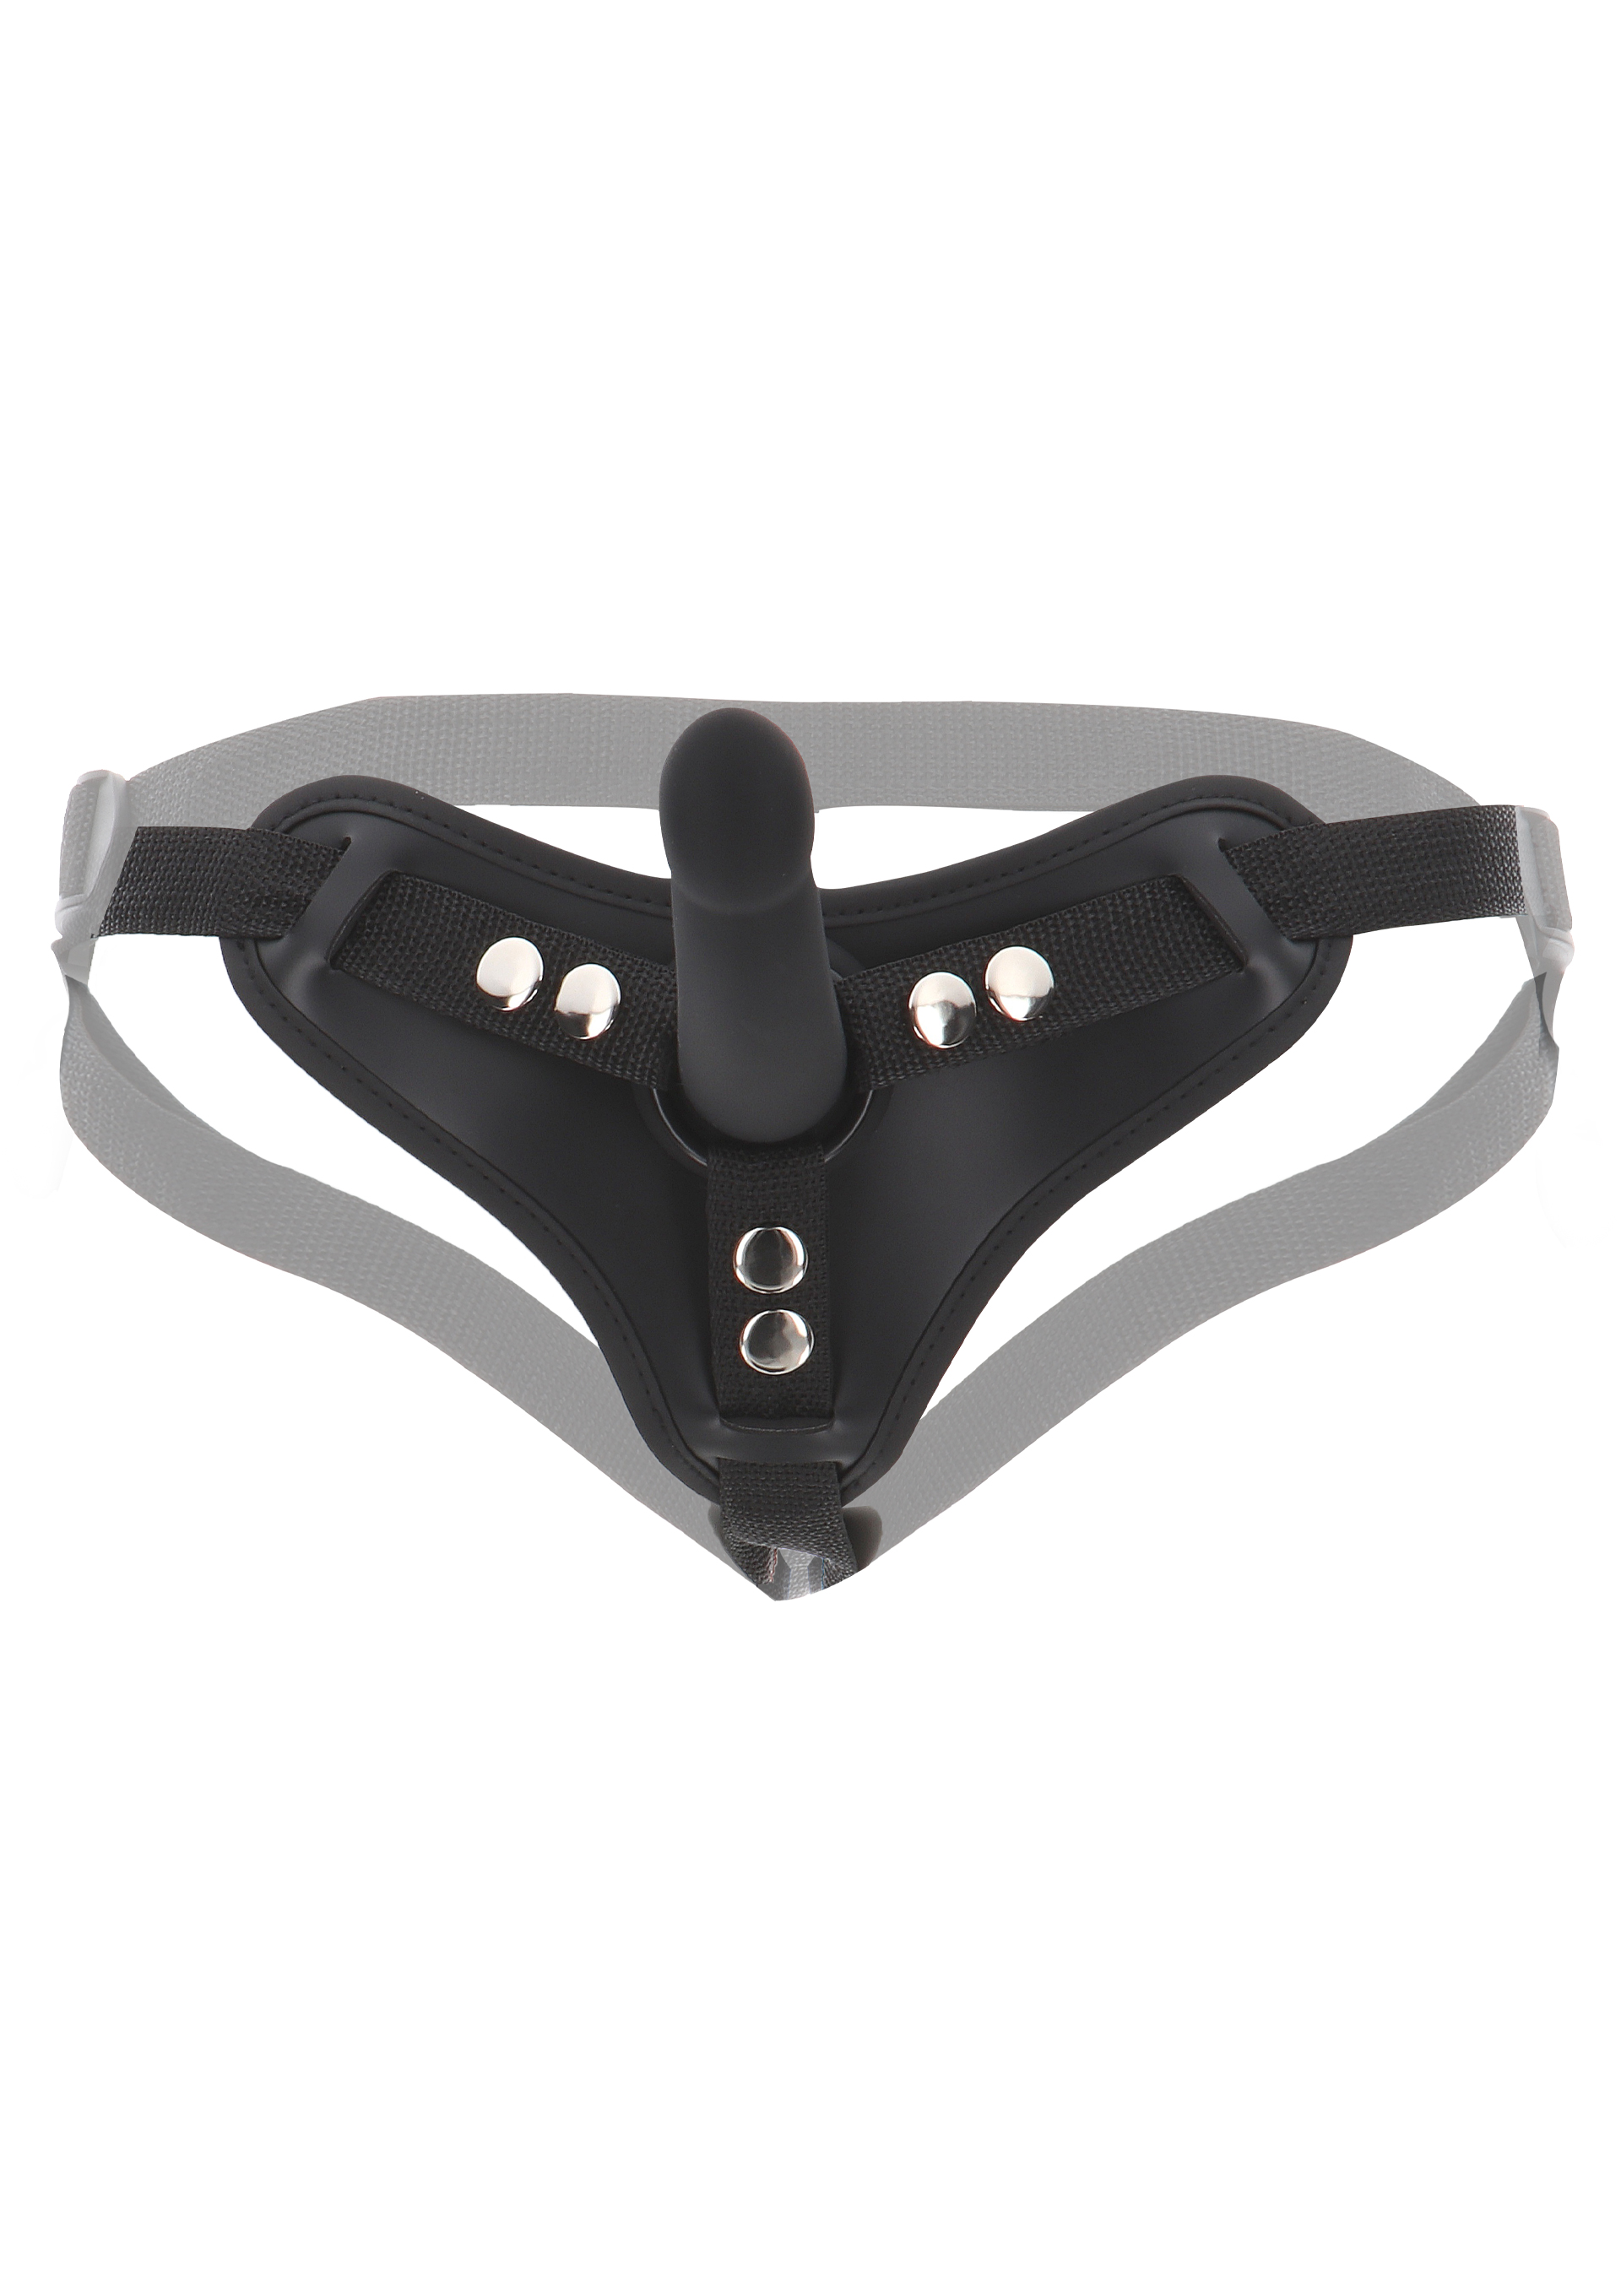 Taboom - Taboom Strap-On Harness with Dong S